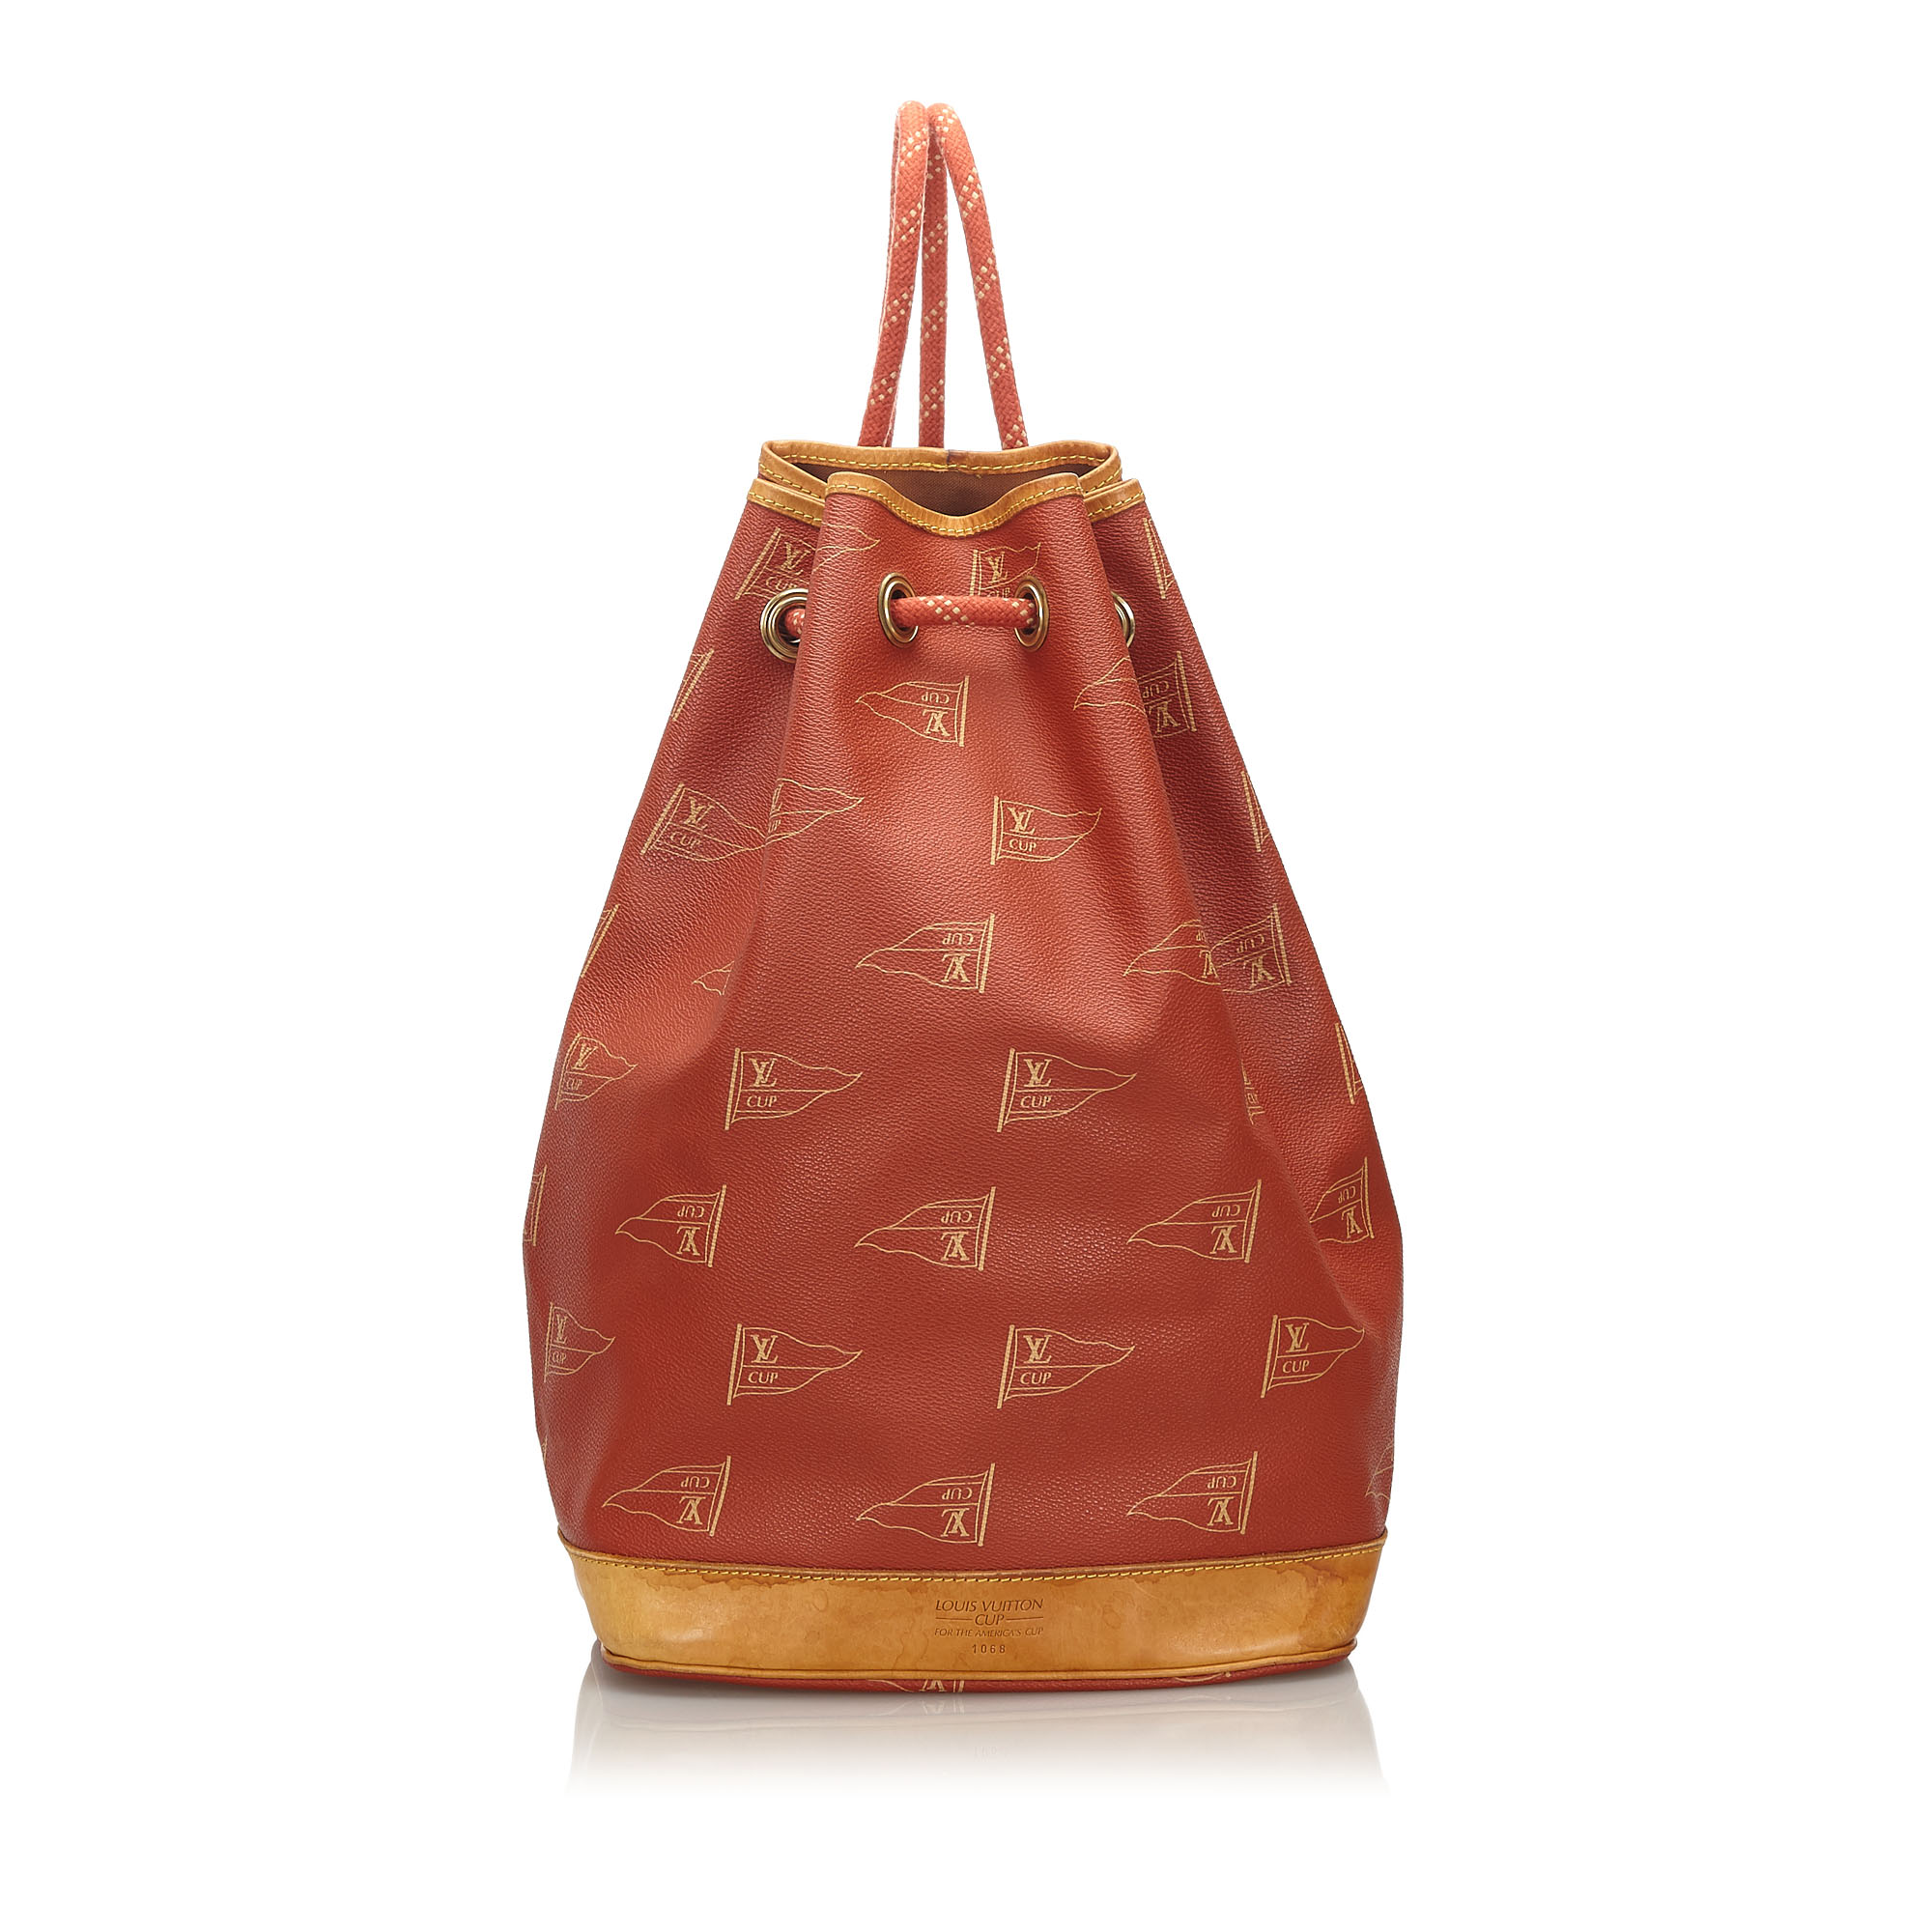 Pre-Loved Louis Vuitton Red 1995 LV Cup St. Tropez Drawstring Backpack France | eBay